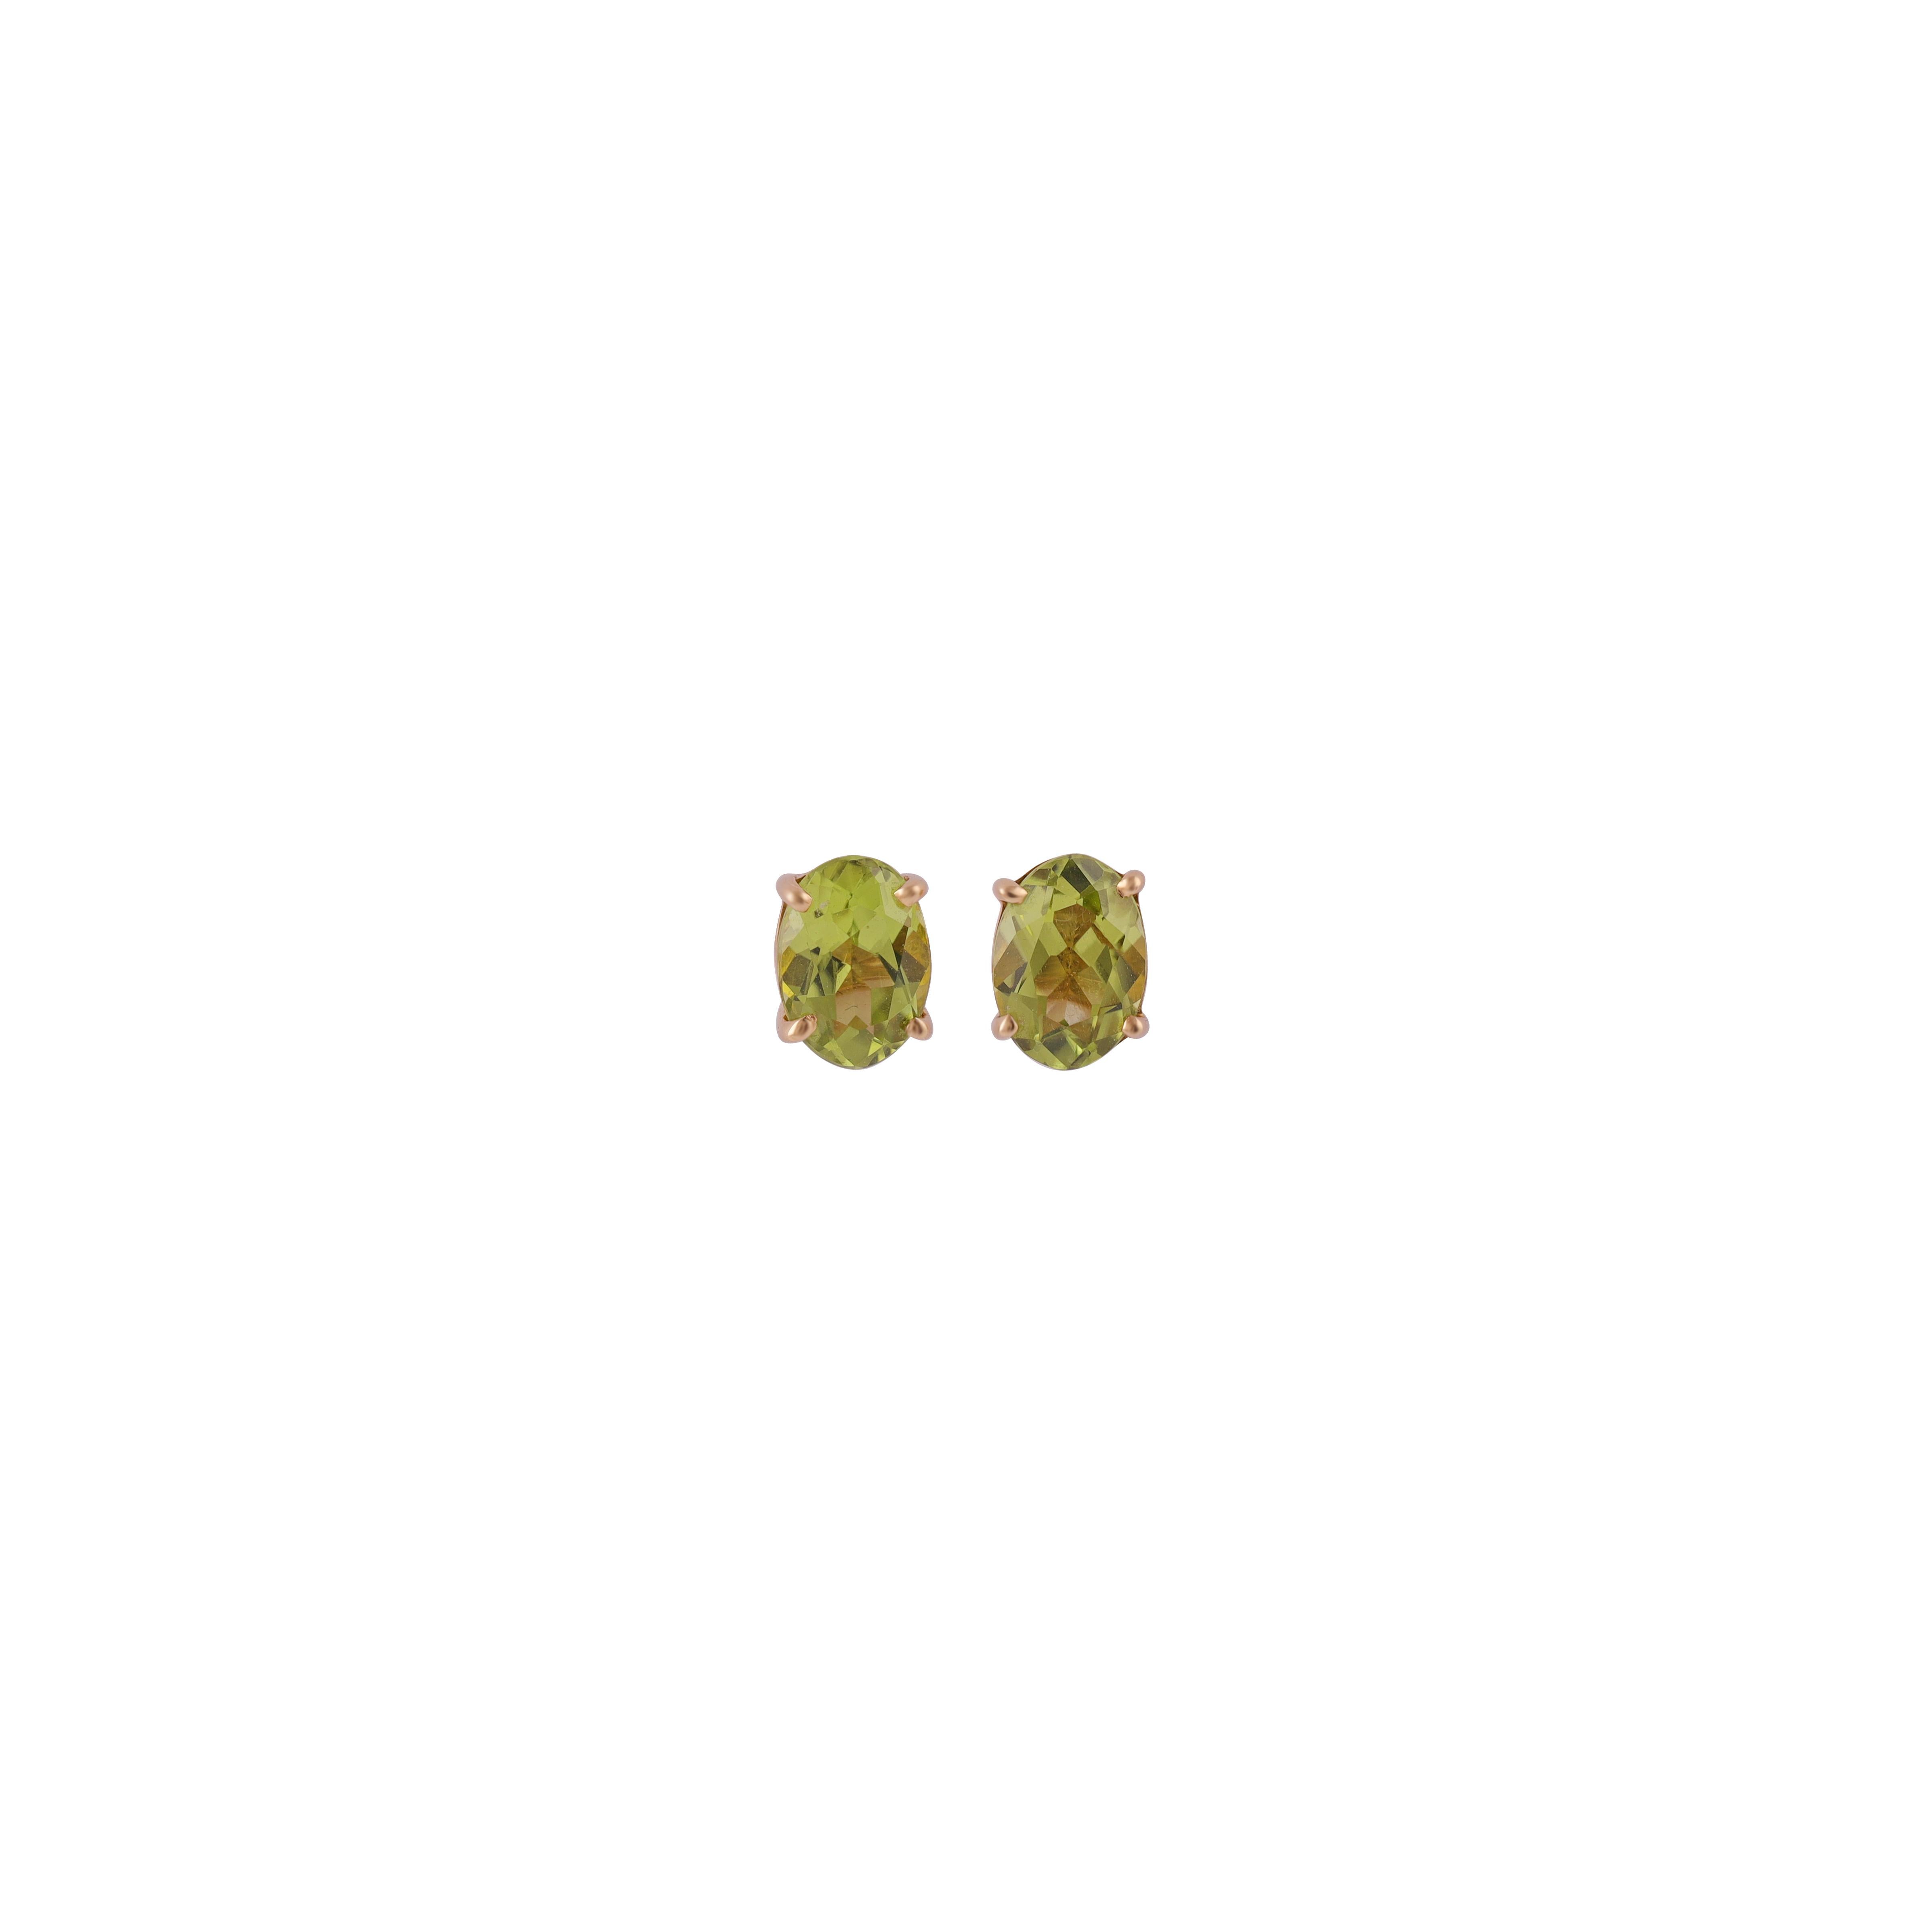 Magnificent Peridot Stud Earrings

Peridot approx. 2.06 CTS
18k Yellow Gold mounting 1.78   Gms

Custom Services
Request Customization